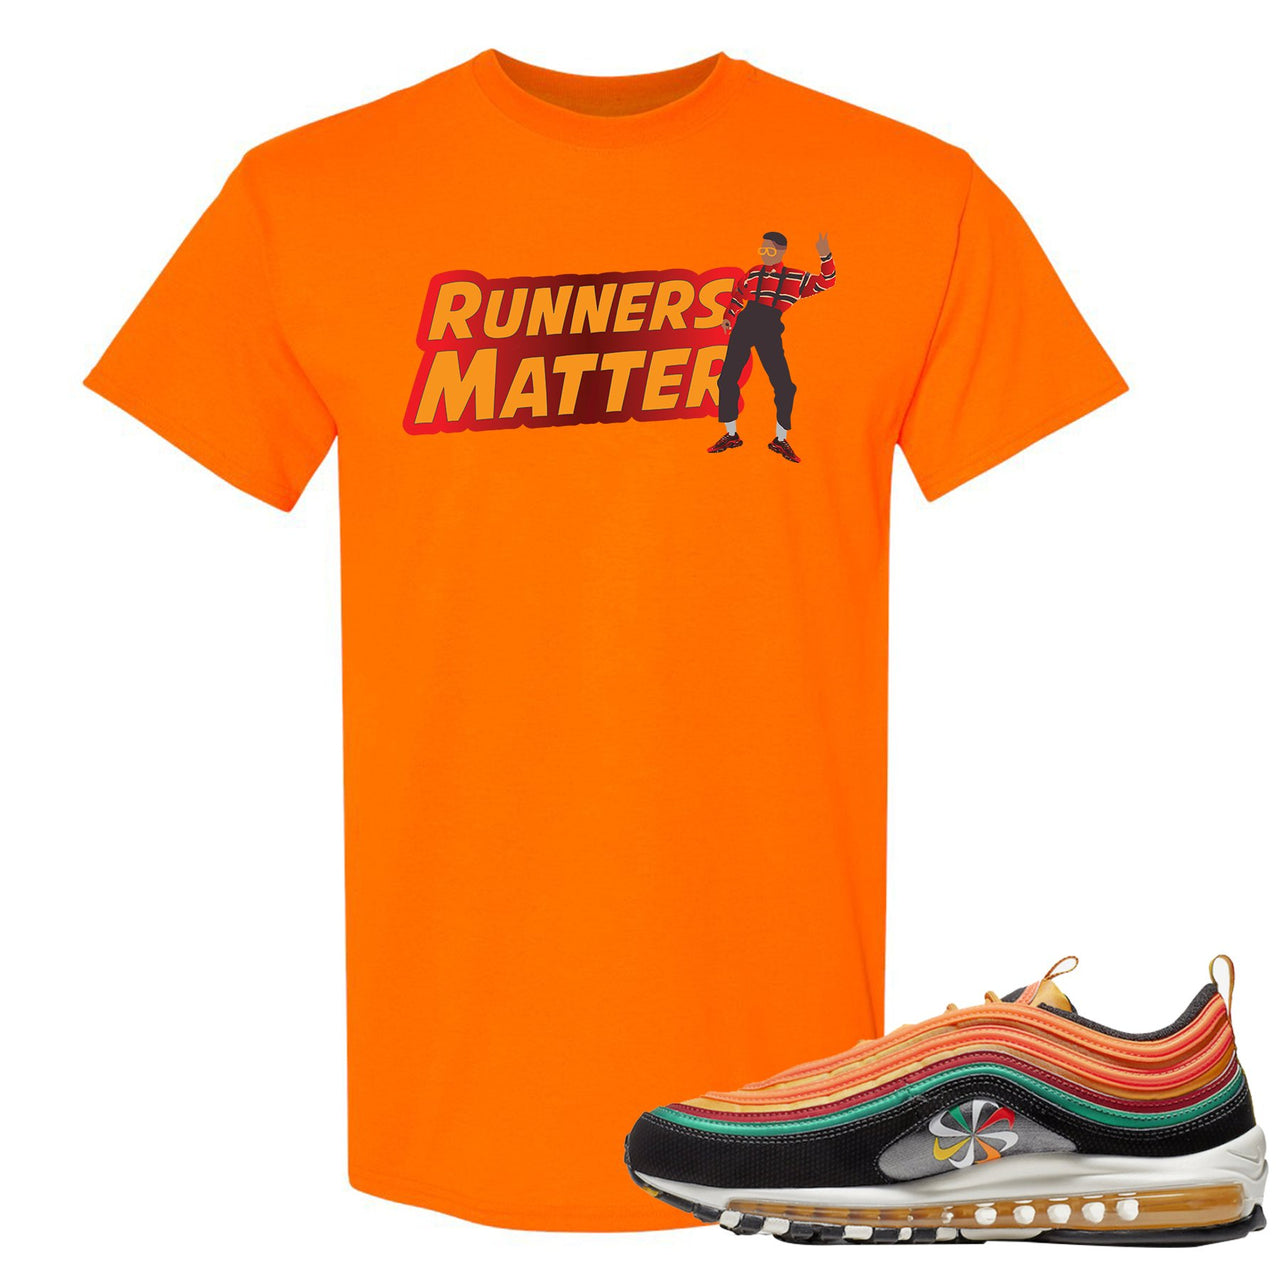 Printed on the front of the Air Max 97 Sunburst safety orange sneaker matching t-shirt is the Runners matter logo